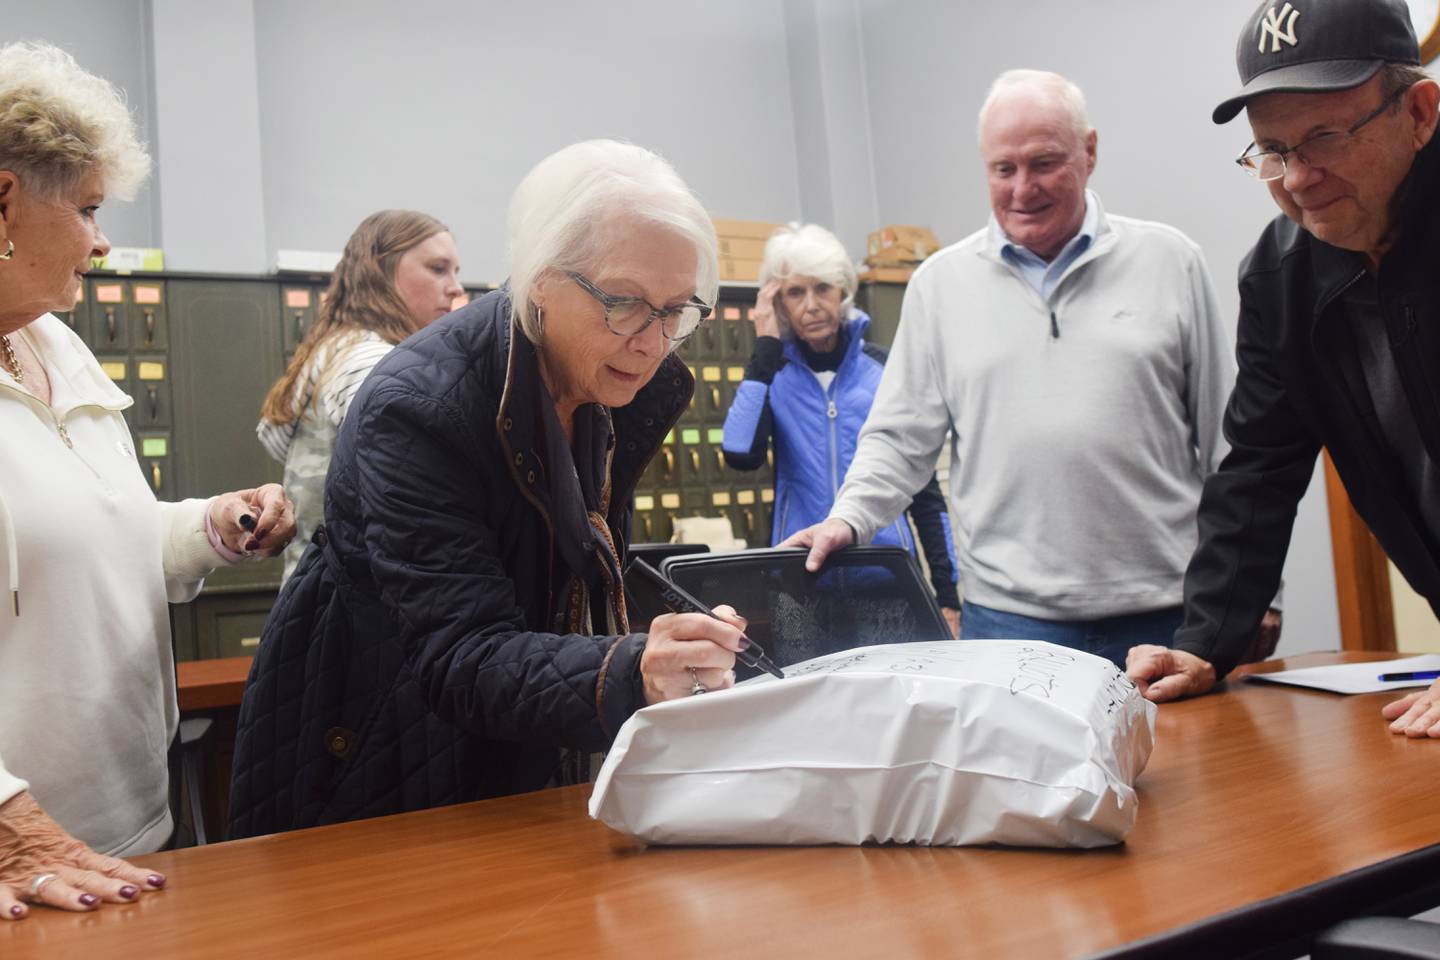 Volunteers sign their names on a sealed envelope containing the 600 absentee ballots counted during Election Day.